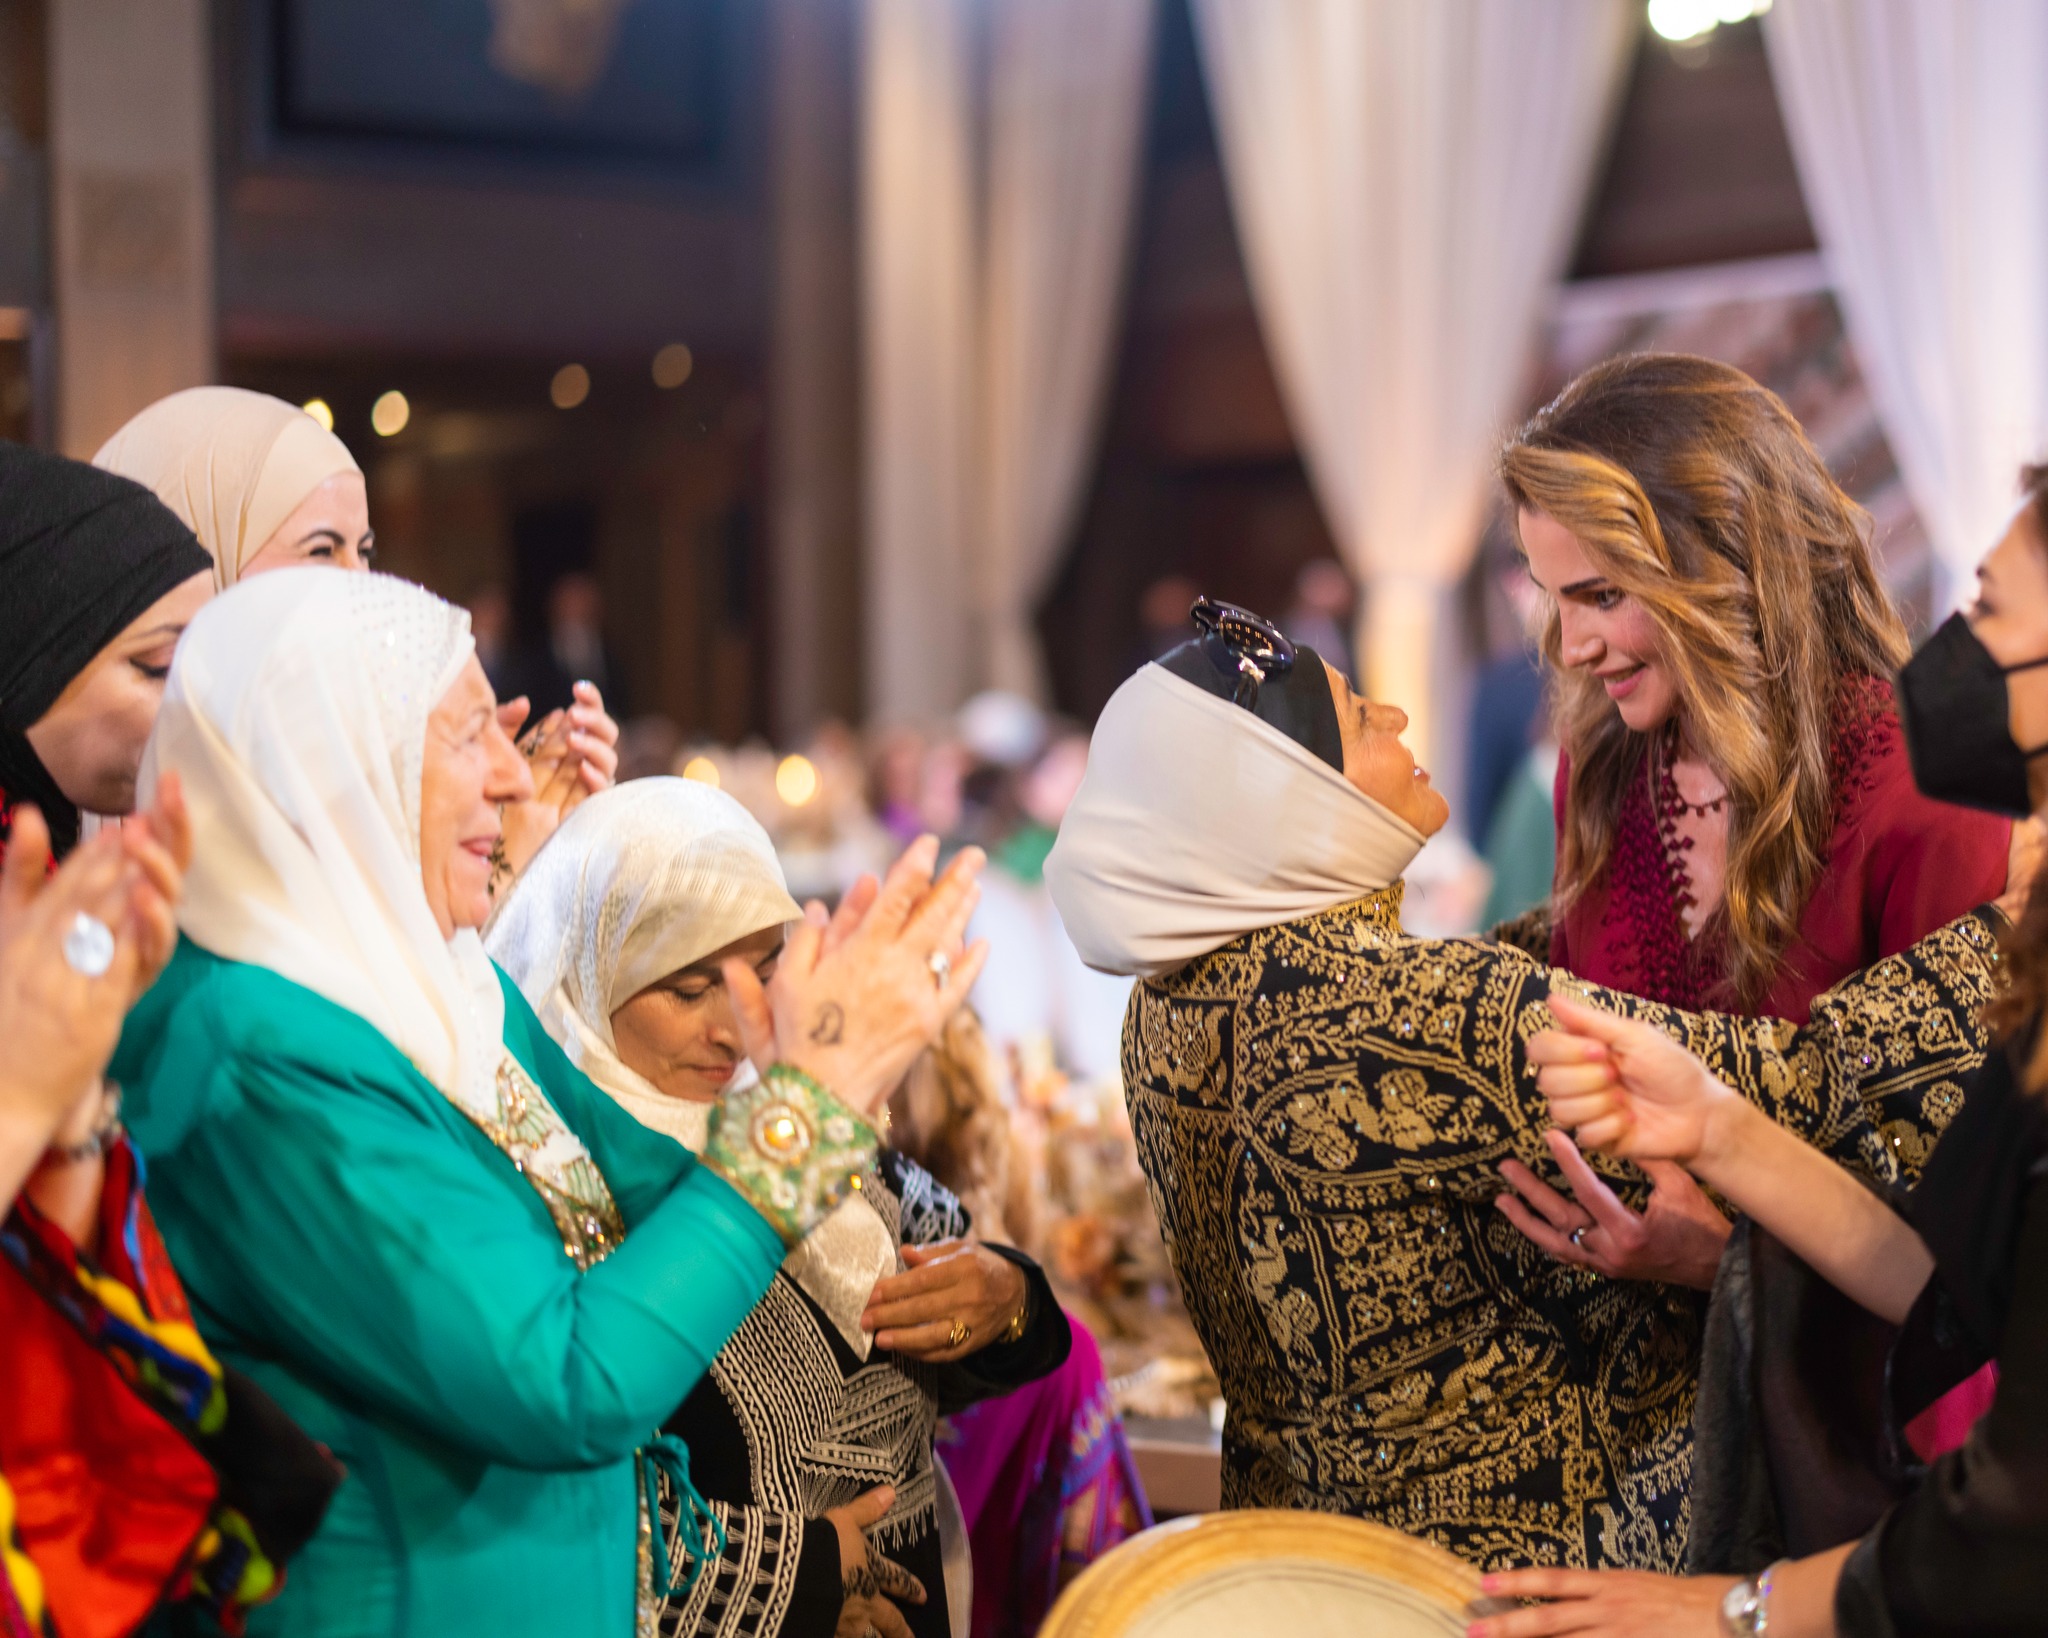 Queen Rania was the host for Princess Iman's henna party